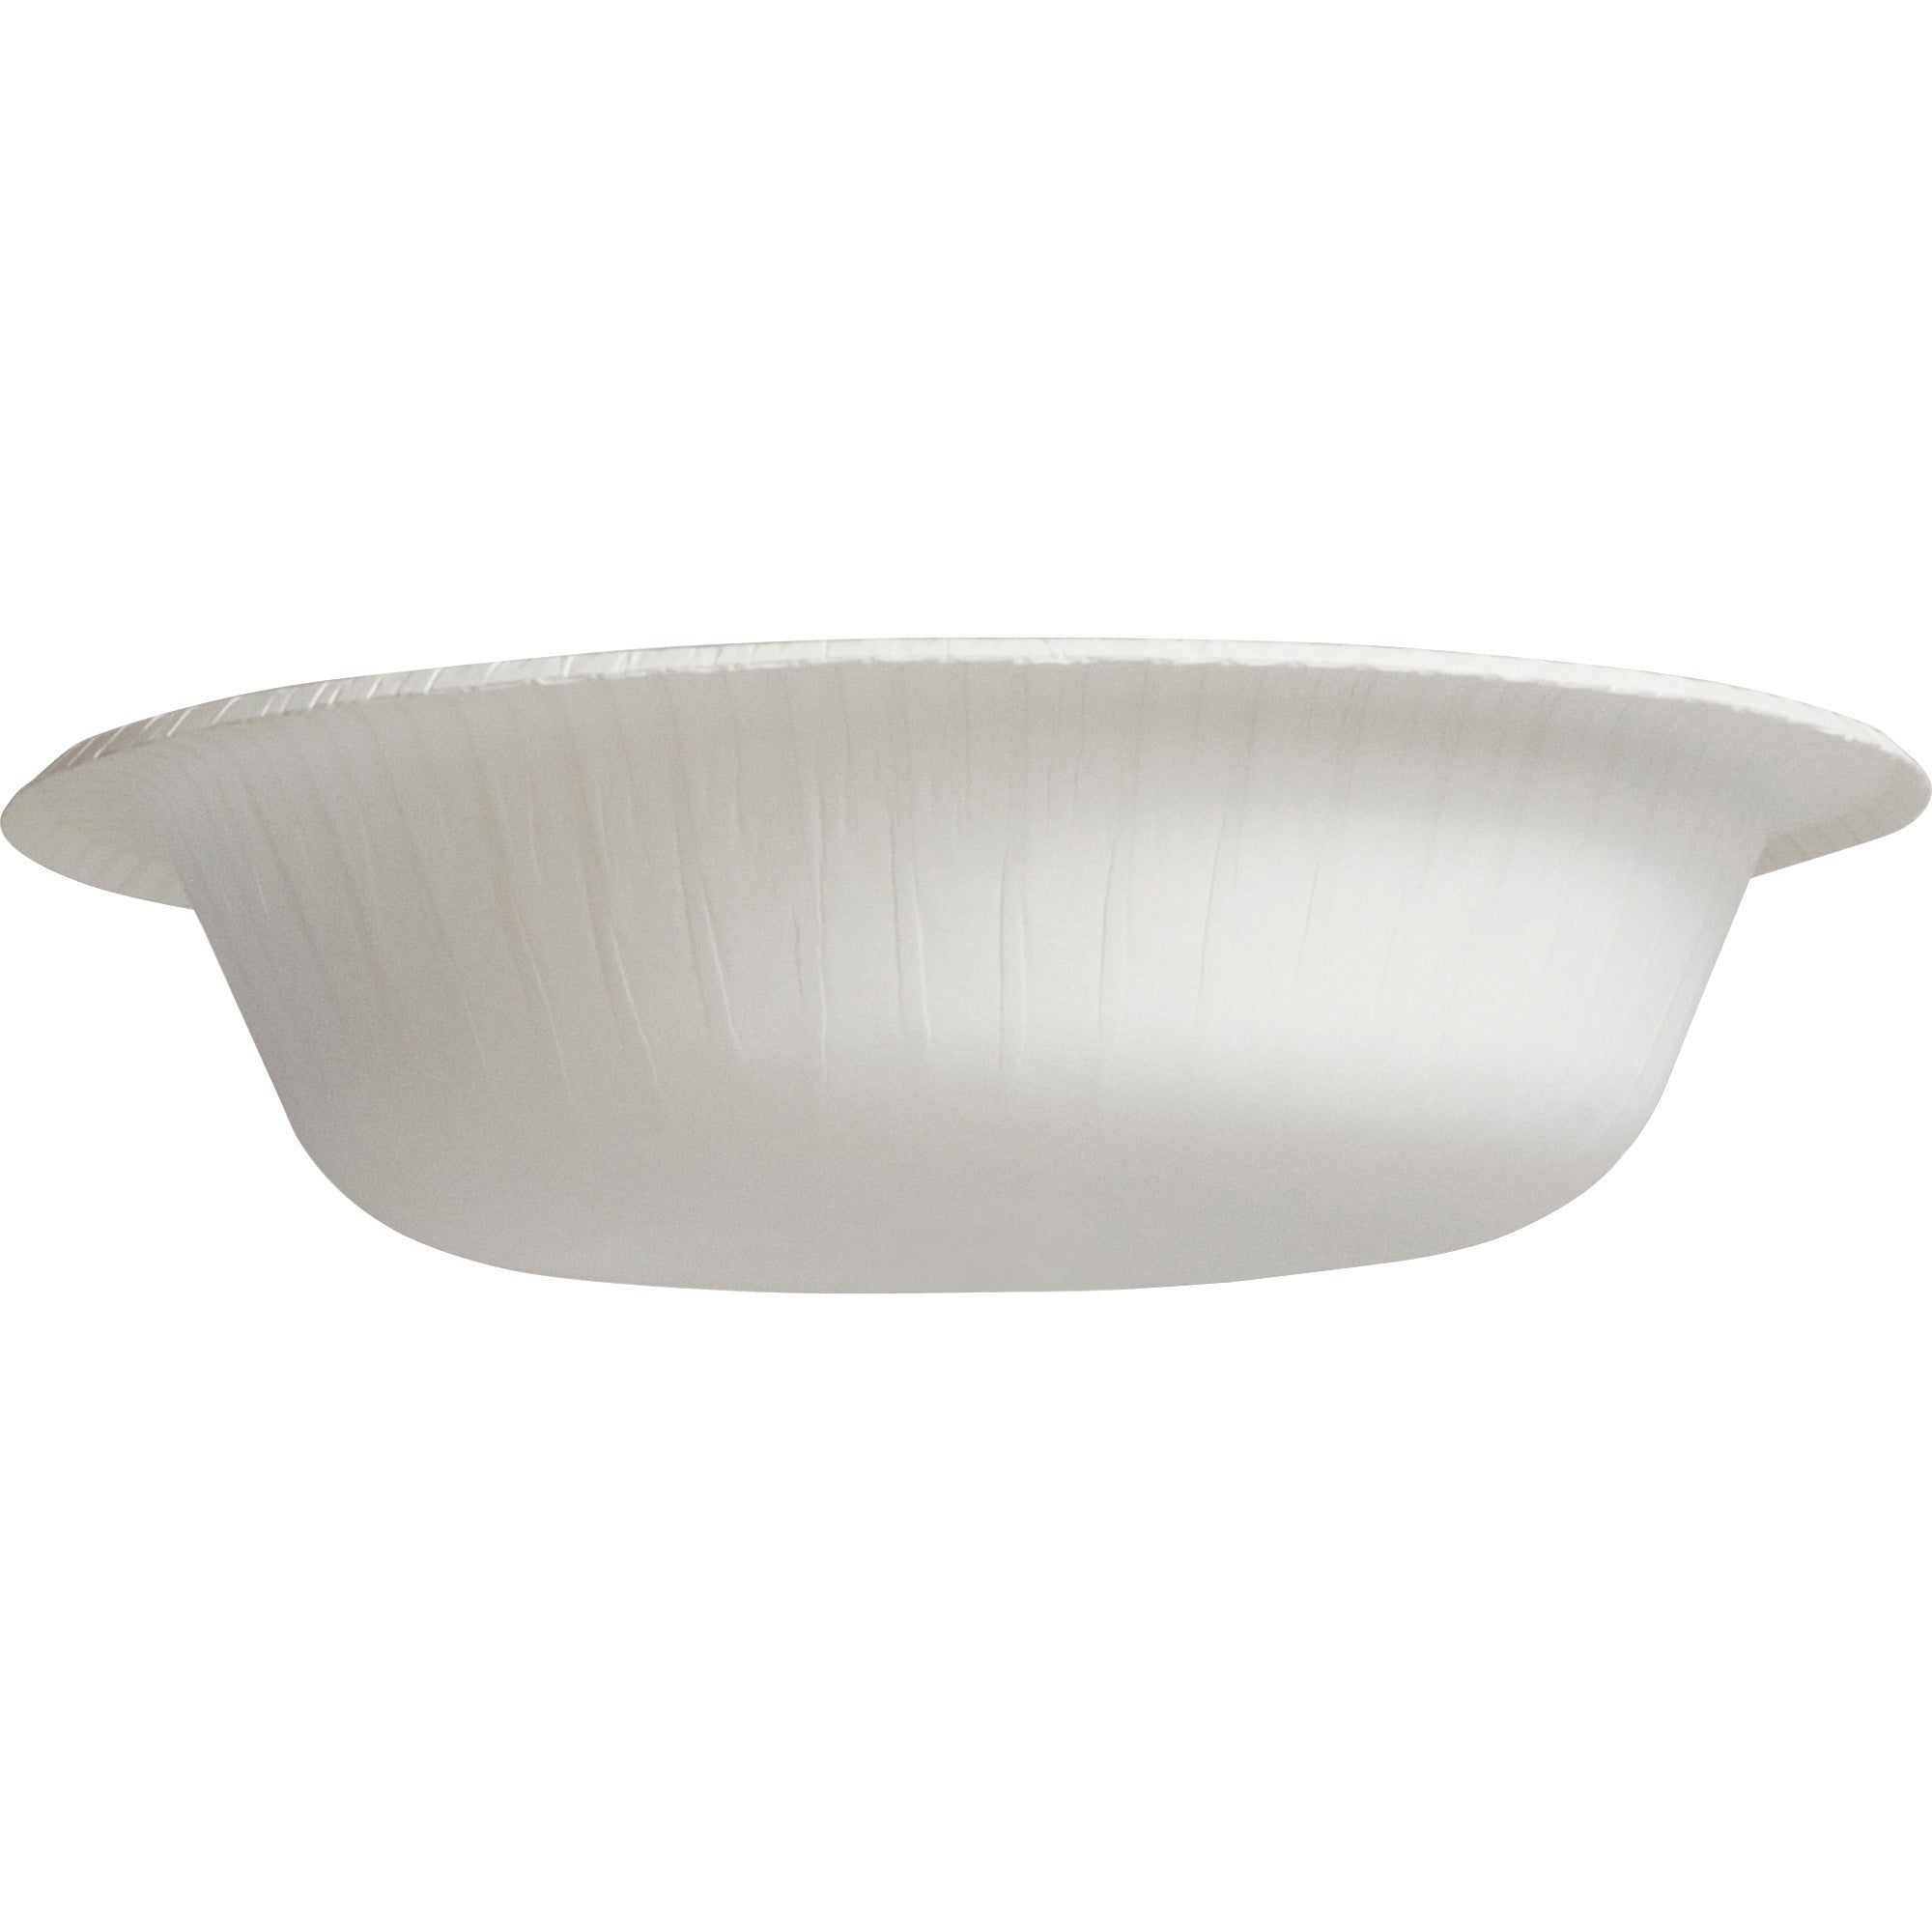 solo-bare-12-oz-heavyweight-paper-bowls-125-pack-bare-disposable-white-paper-body-8-carton_scchb12bj7234ct - 2